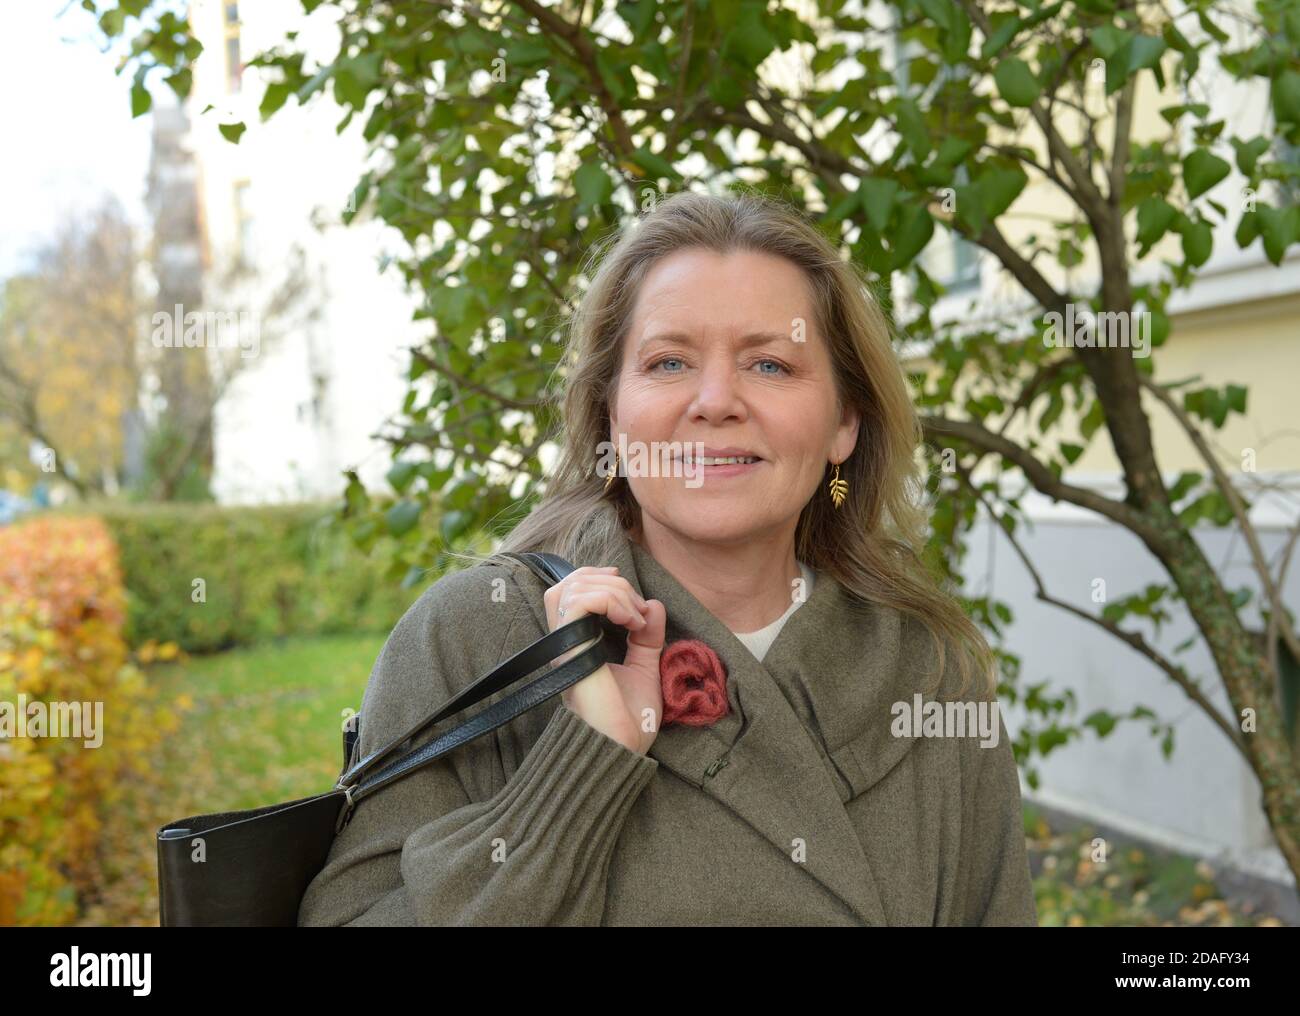 woman with intense blue eyes with a grey coat outdoor in an urban and green area Stock Photo